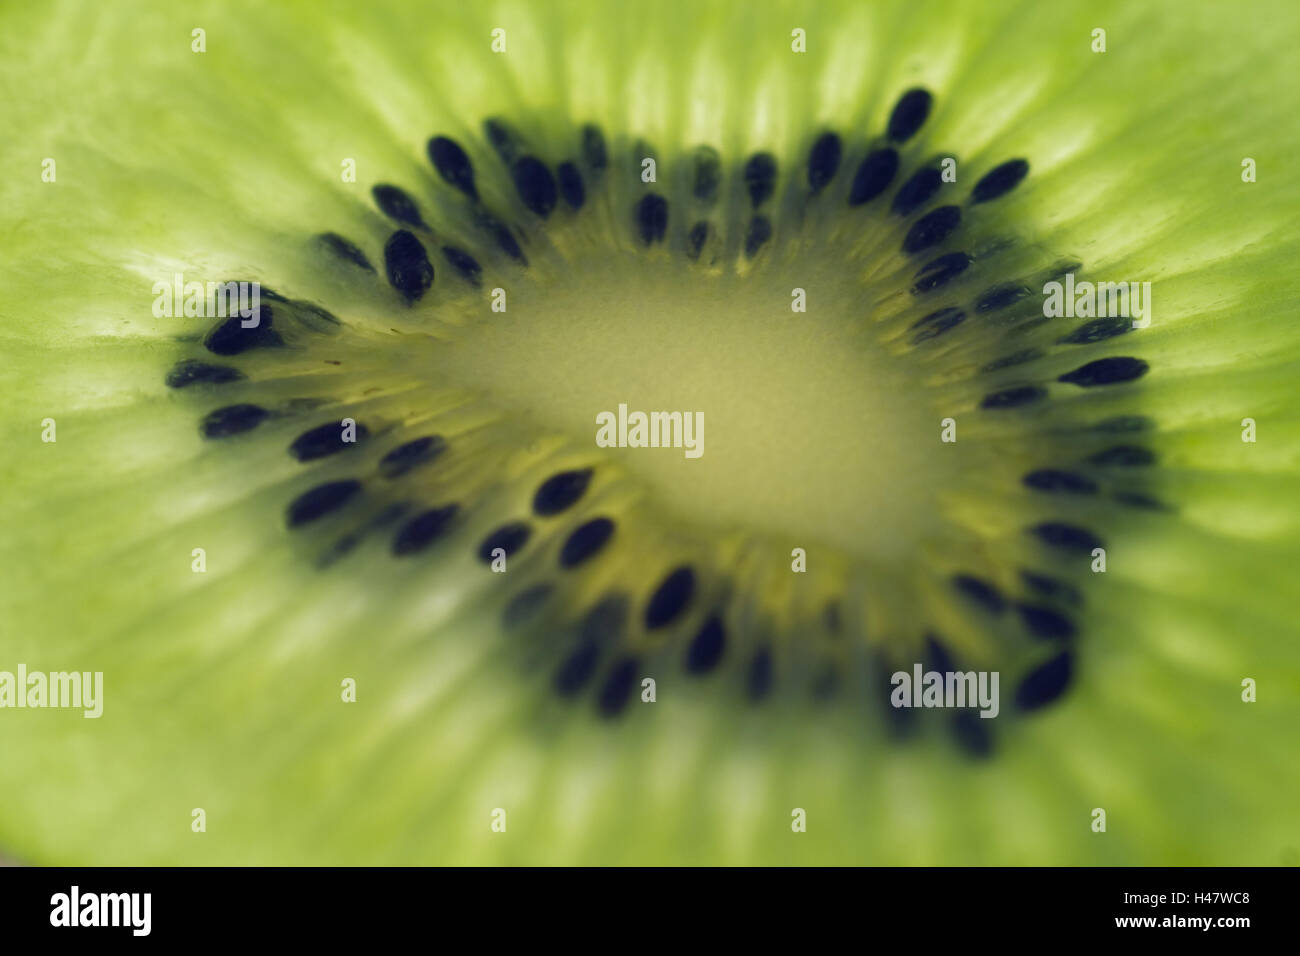 Kiwi, detail, cut open, slice, green, transmitted light, close up, Food, fruit, berries, kiwi fruits, fruits, ovally, flesh, green, fruit axis, cores, ripe, sweetly, sour, juicy, fruity, pale green, vitamins, freshness, curled, detail, product photography, Stock Photo